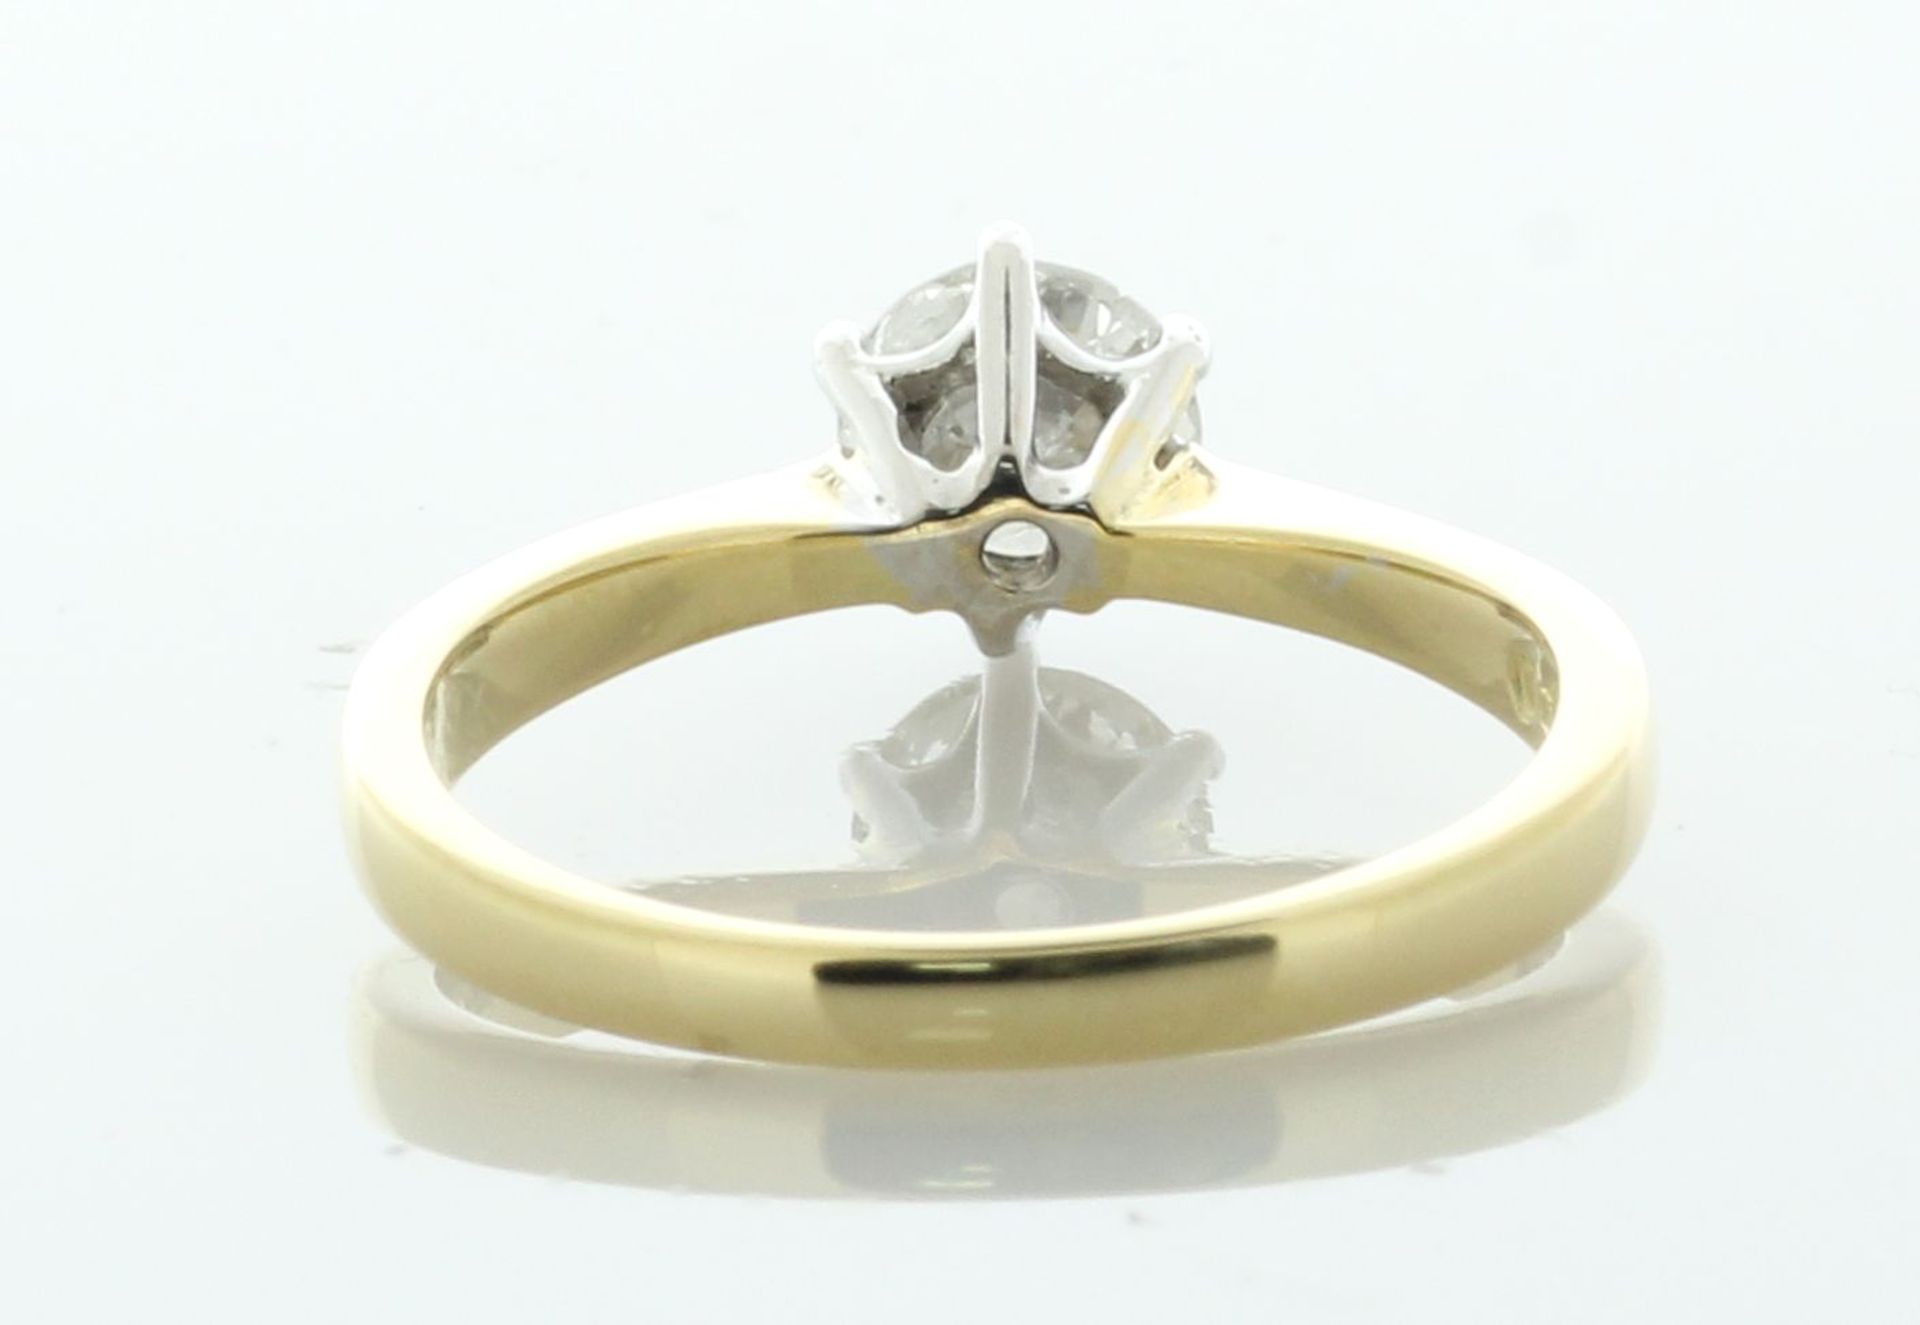 18ct Yellow Gold Single Stone Six Claw Set Diamond Ring 0.79 Carats - Valued By IDI £6,680.00 - - Image 4 of 6